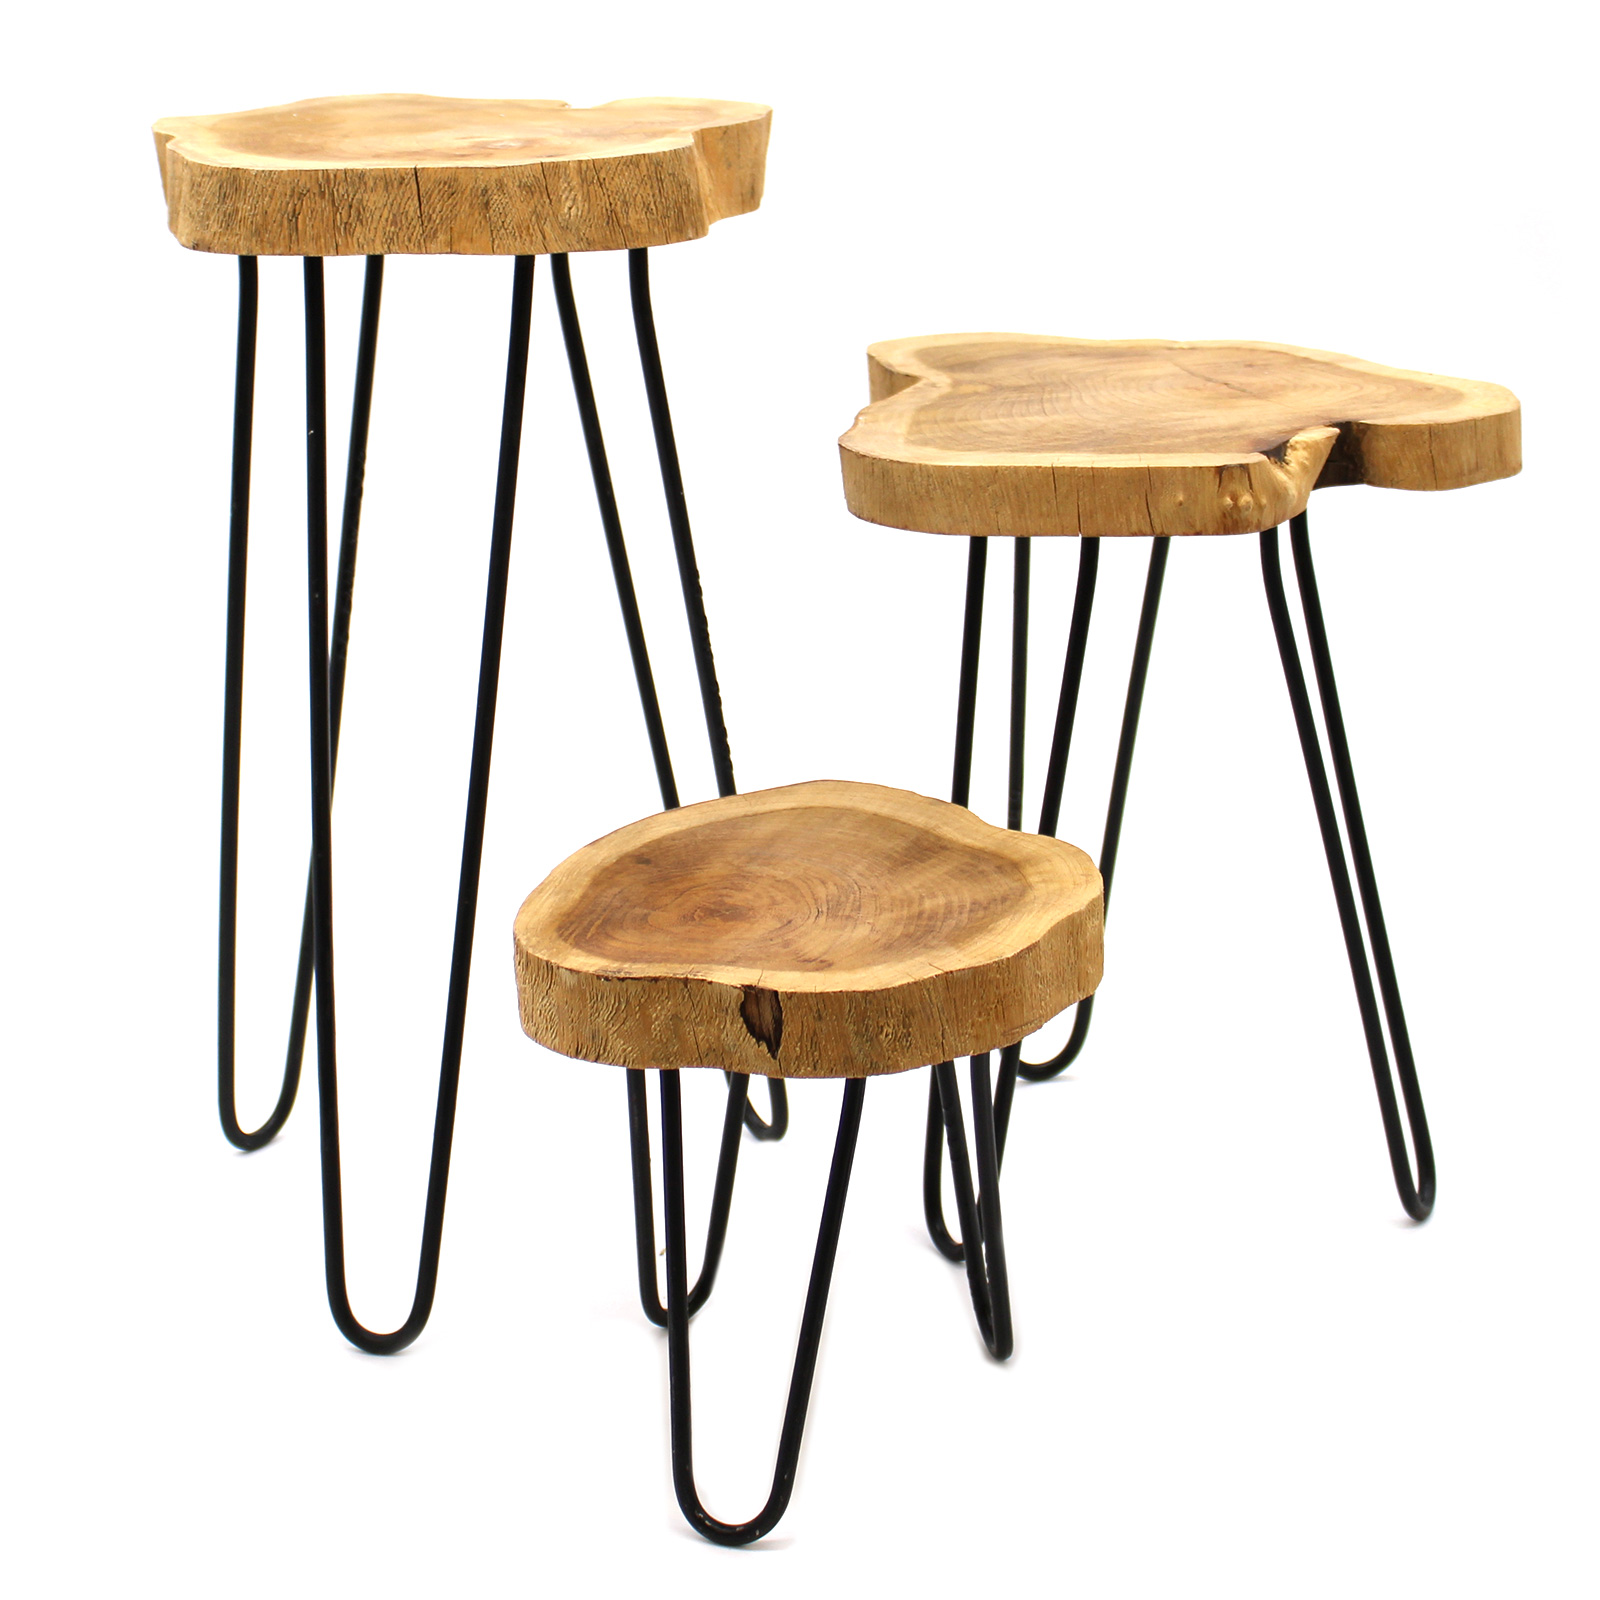 Set of 3 Gamal Wood Plant Stands - Natural - Click Image to Close